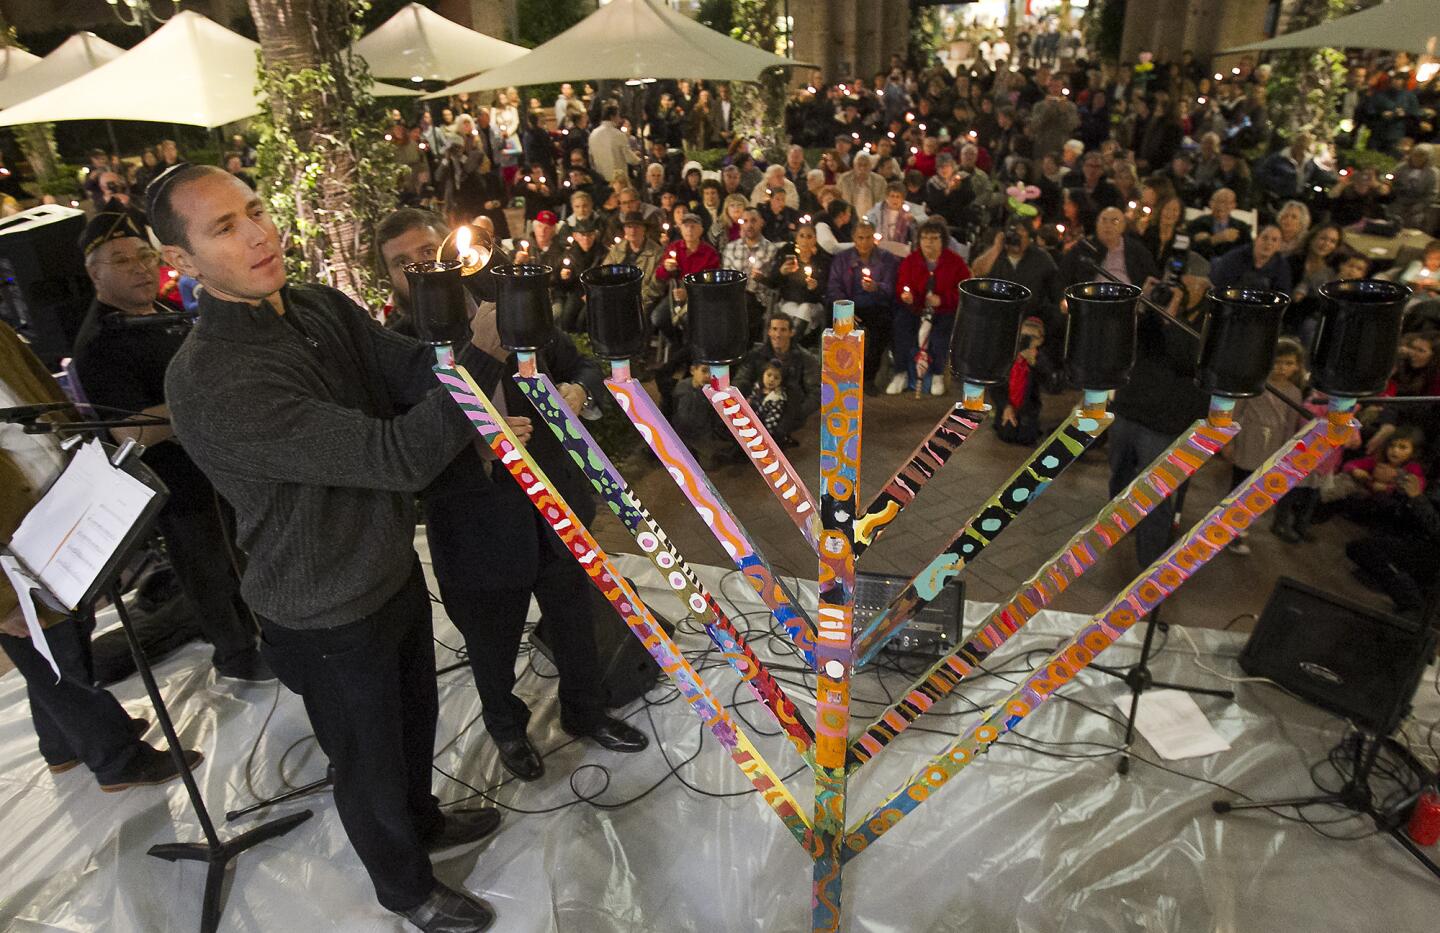 Jason Lezak, an 8-time Olympic medalist, along with Rabbi Reuven Mintz, from the Chabad Center for Jewish Life, Newport Beach, light a public menorah to celebrate the first day of Hanukkah on Tuesday, December 16, at Fashion Island.